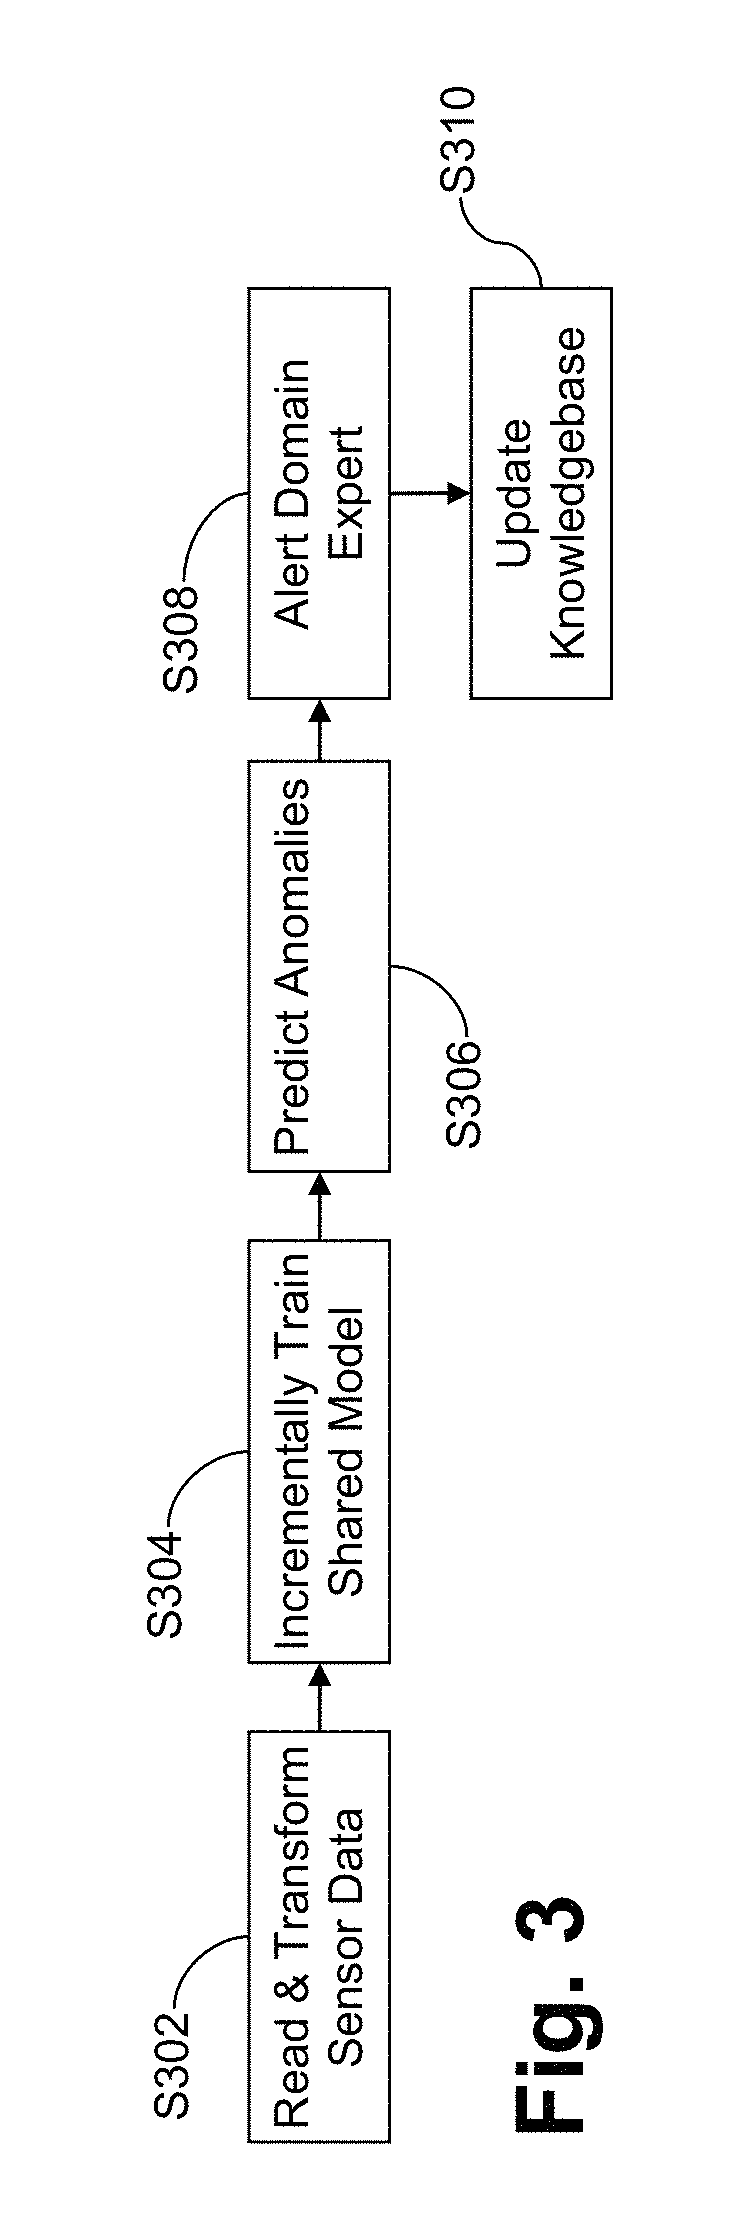 Systems and/or methods for dynamic anomaly detection in machine sensor data